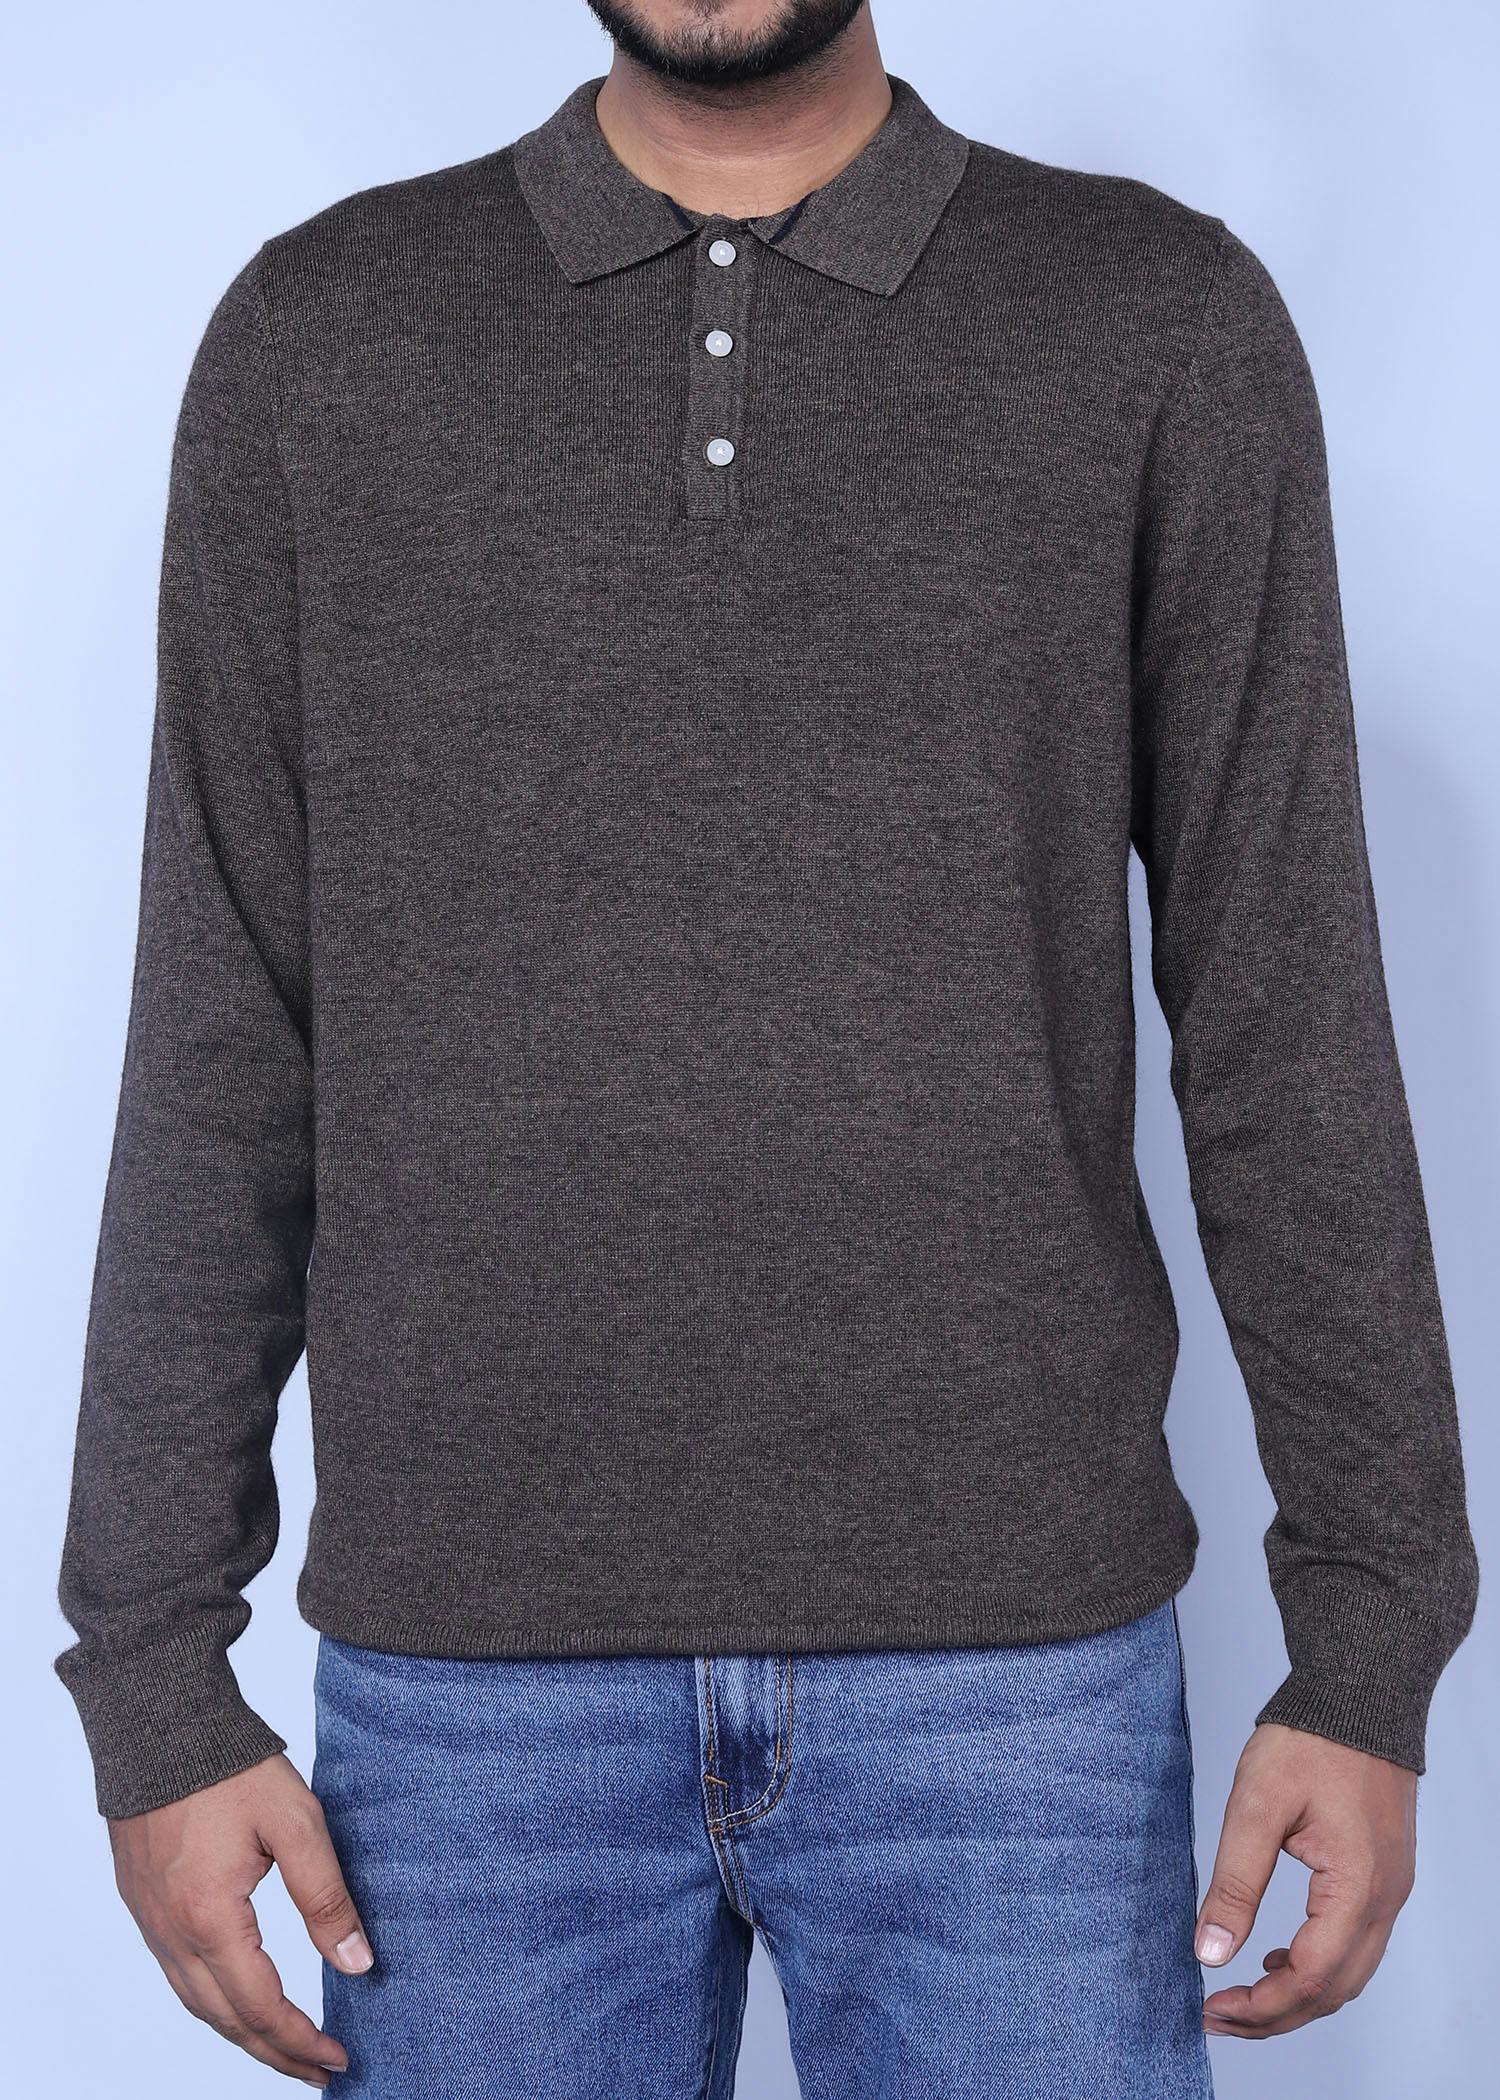 athens sweater brown color half front view